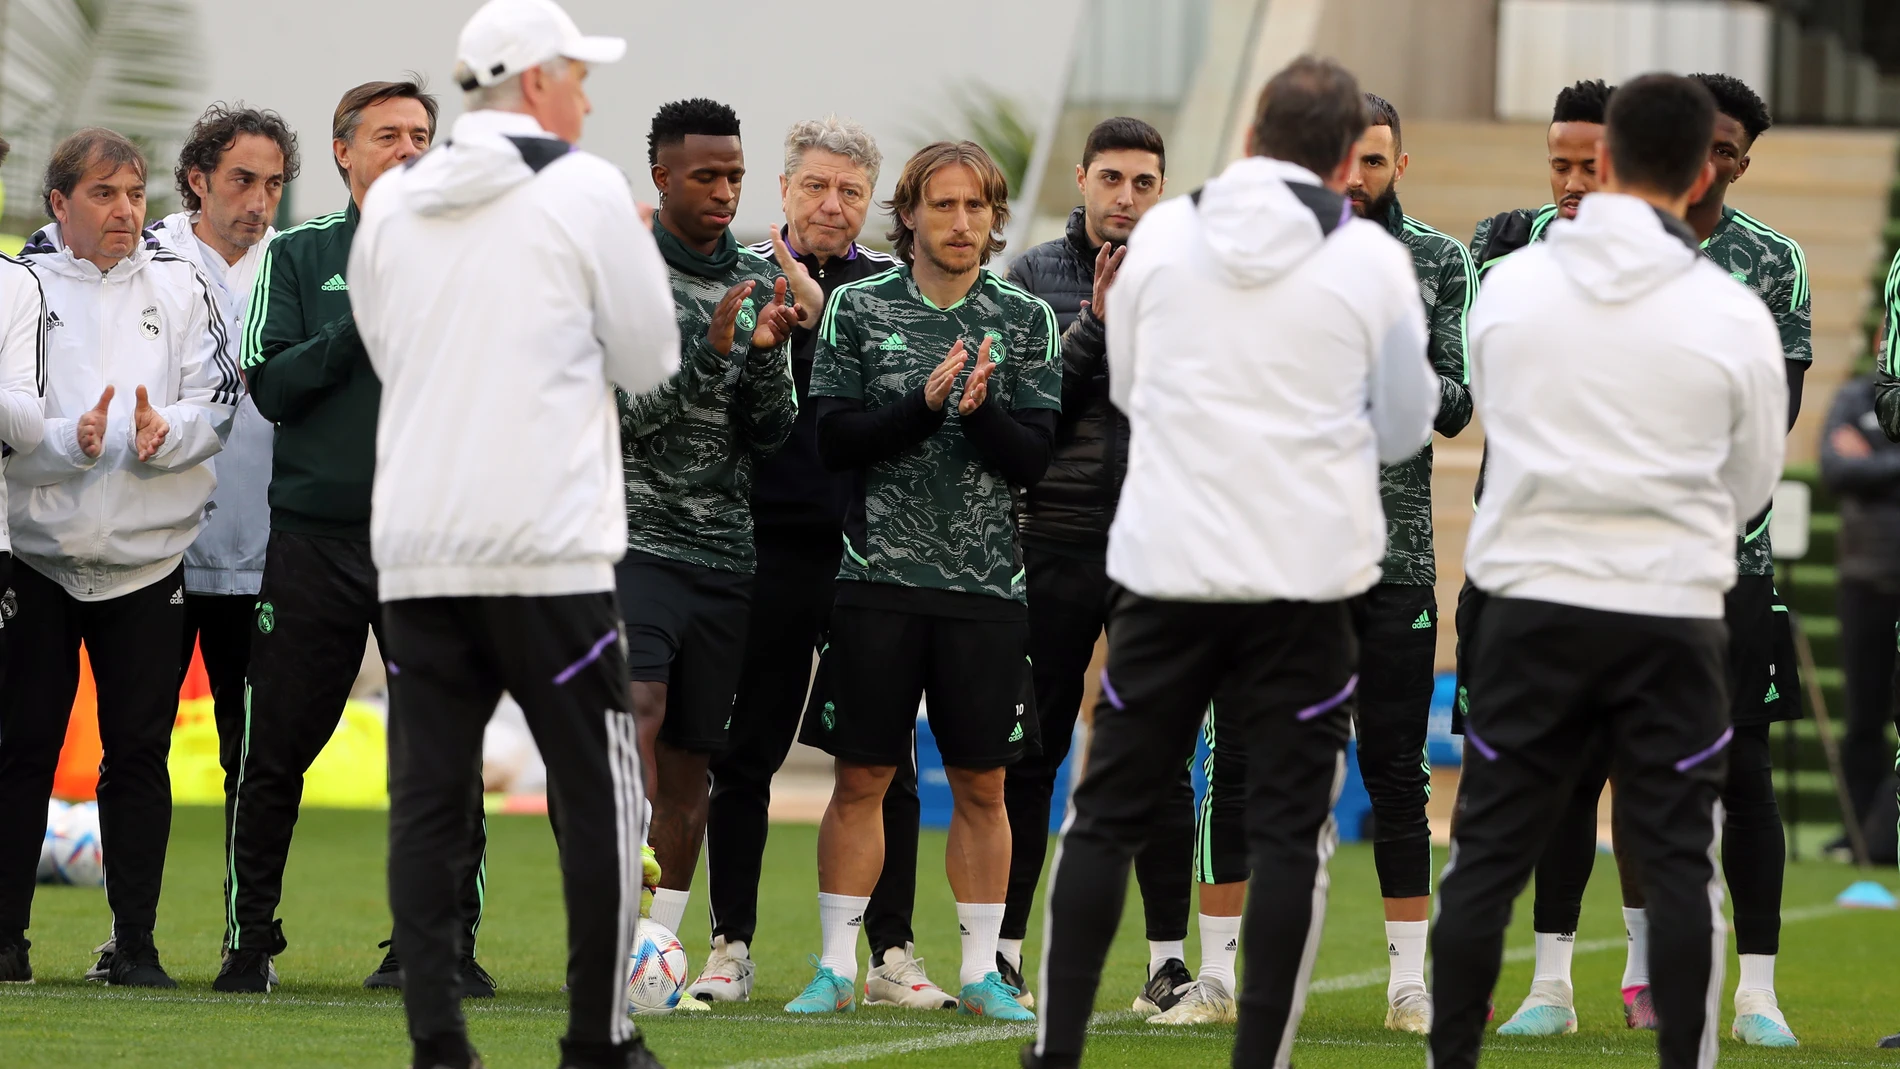 Rabat (Morocco), 10/02/2023.- Real Madrid player Luka Modric (C) attends a training session at Mohammed VI Football Complex in Rabat, Morocco, 10 February 2023. Real Madrid will face Al Hilal SFC in the FIFA Club World Cup final match on 11 February 2023. (Mundial de Fútbol, Marruecos) EFE/EPA/MOHAMED MESSARA 